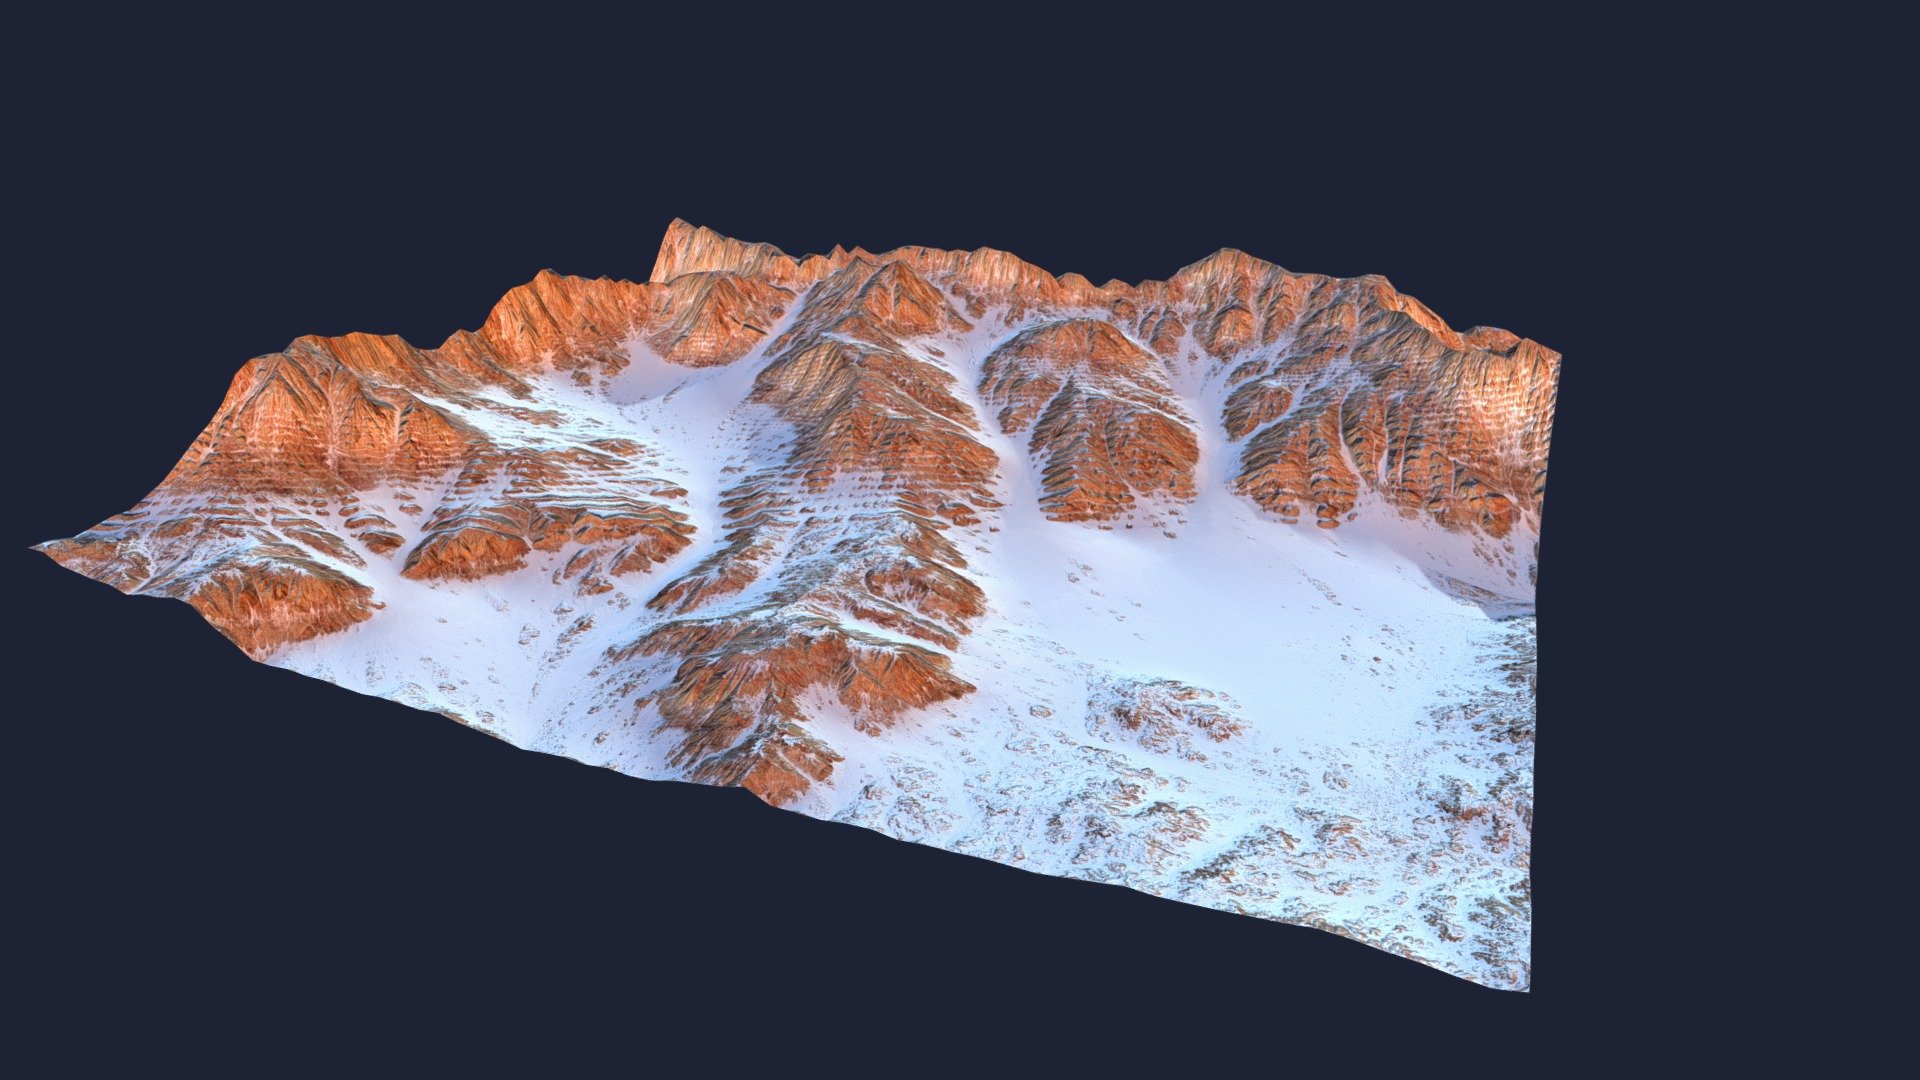 Snowy Mountain made and textured in World Machine.
Diffuse and normal map, 4096x4096 3d model